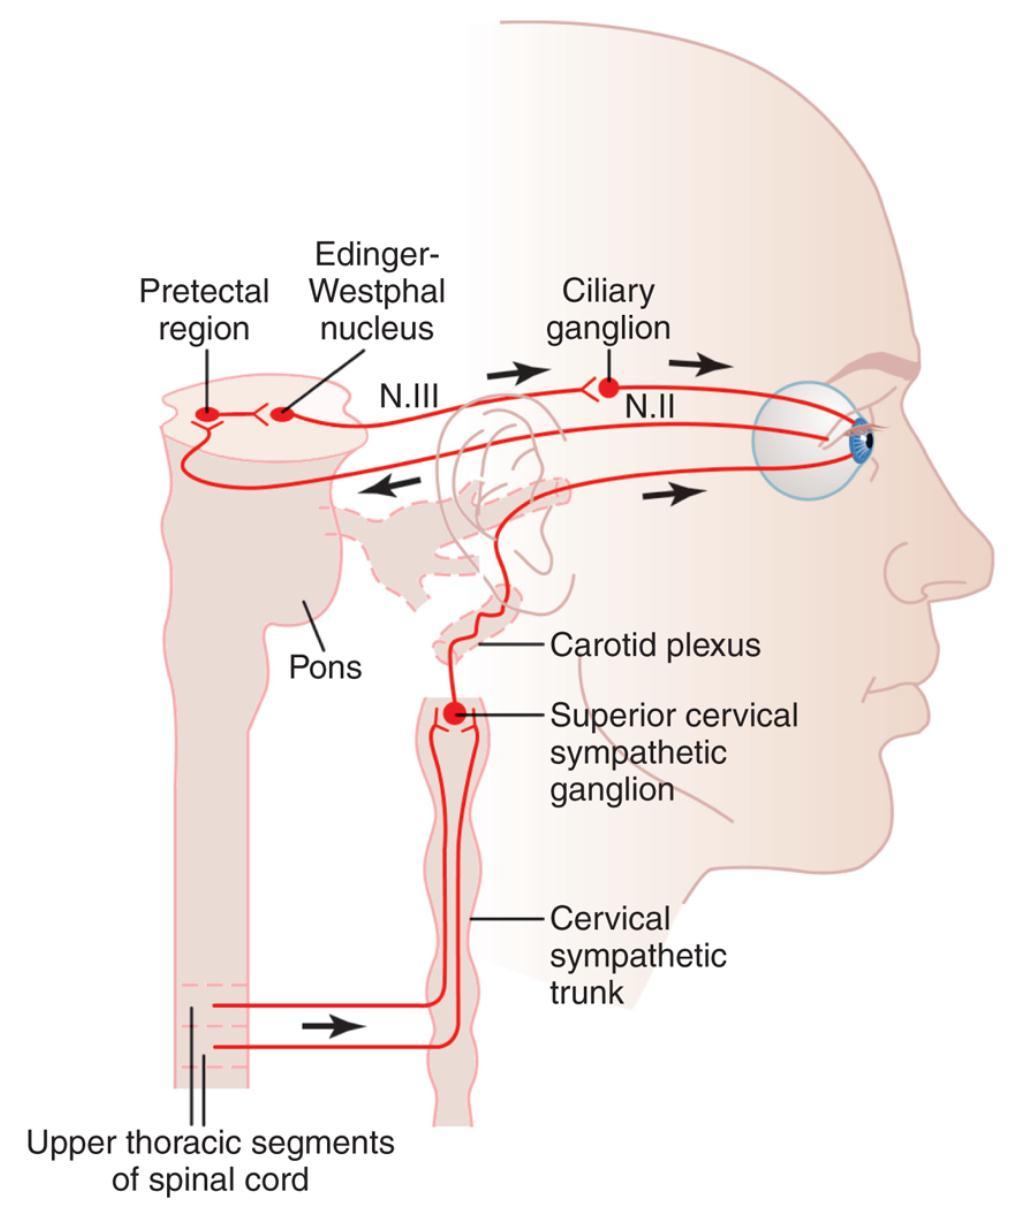 Autonomic Control of Accommodation and Pupillary Aperture - Parasympathetic preganglionic fibers in the Edinger- Westphal nucleus to third nerve to the ciliary ganglion.